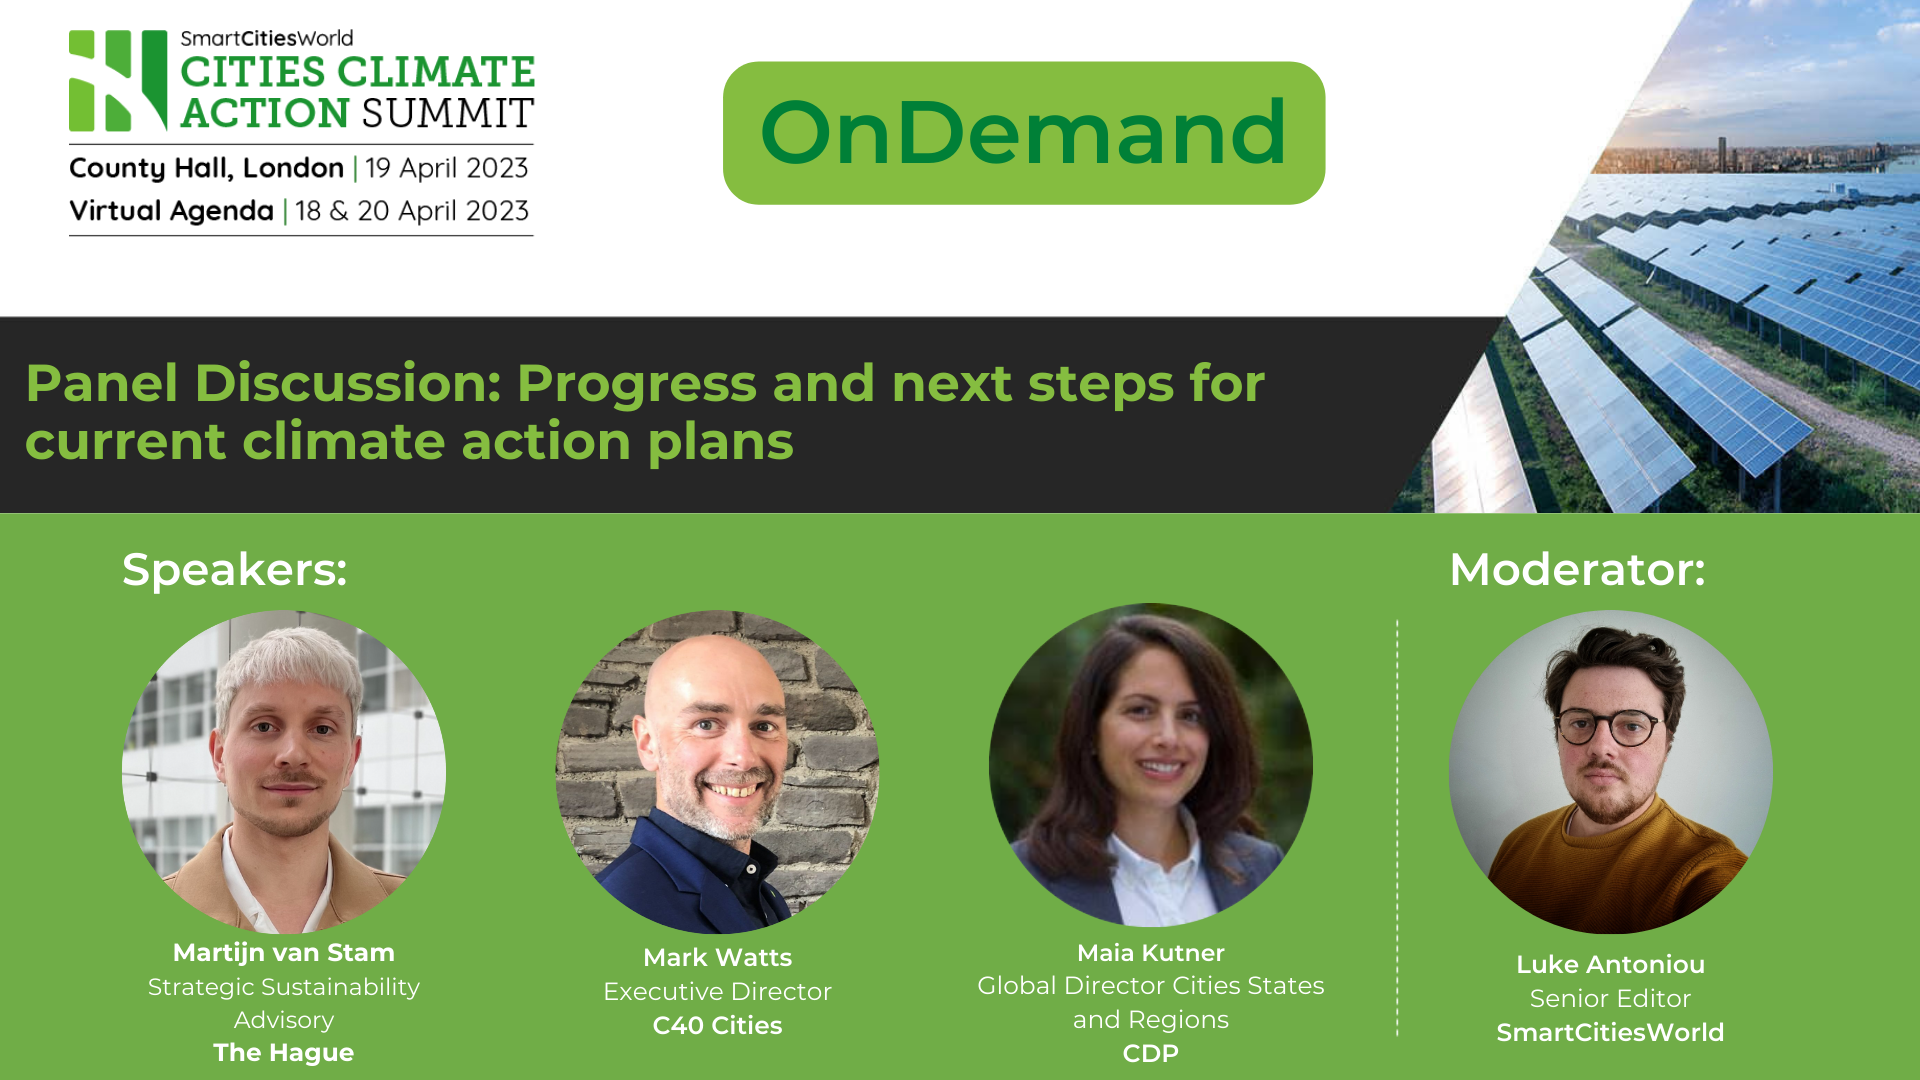 OnDemand Panel discussion: Progress and next steps on current climate action plans